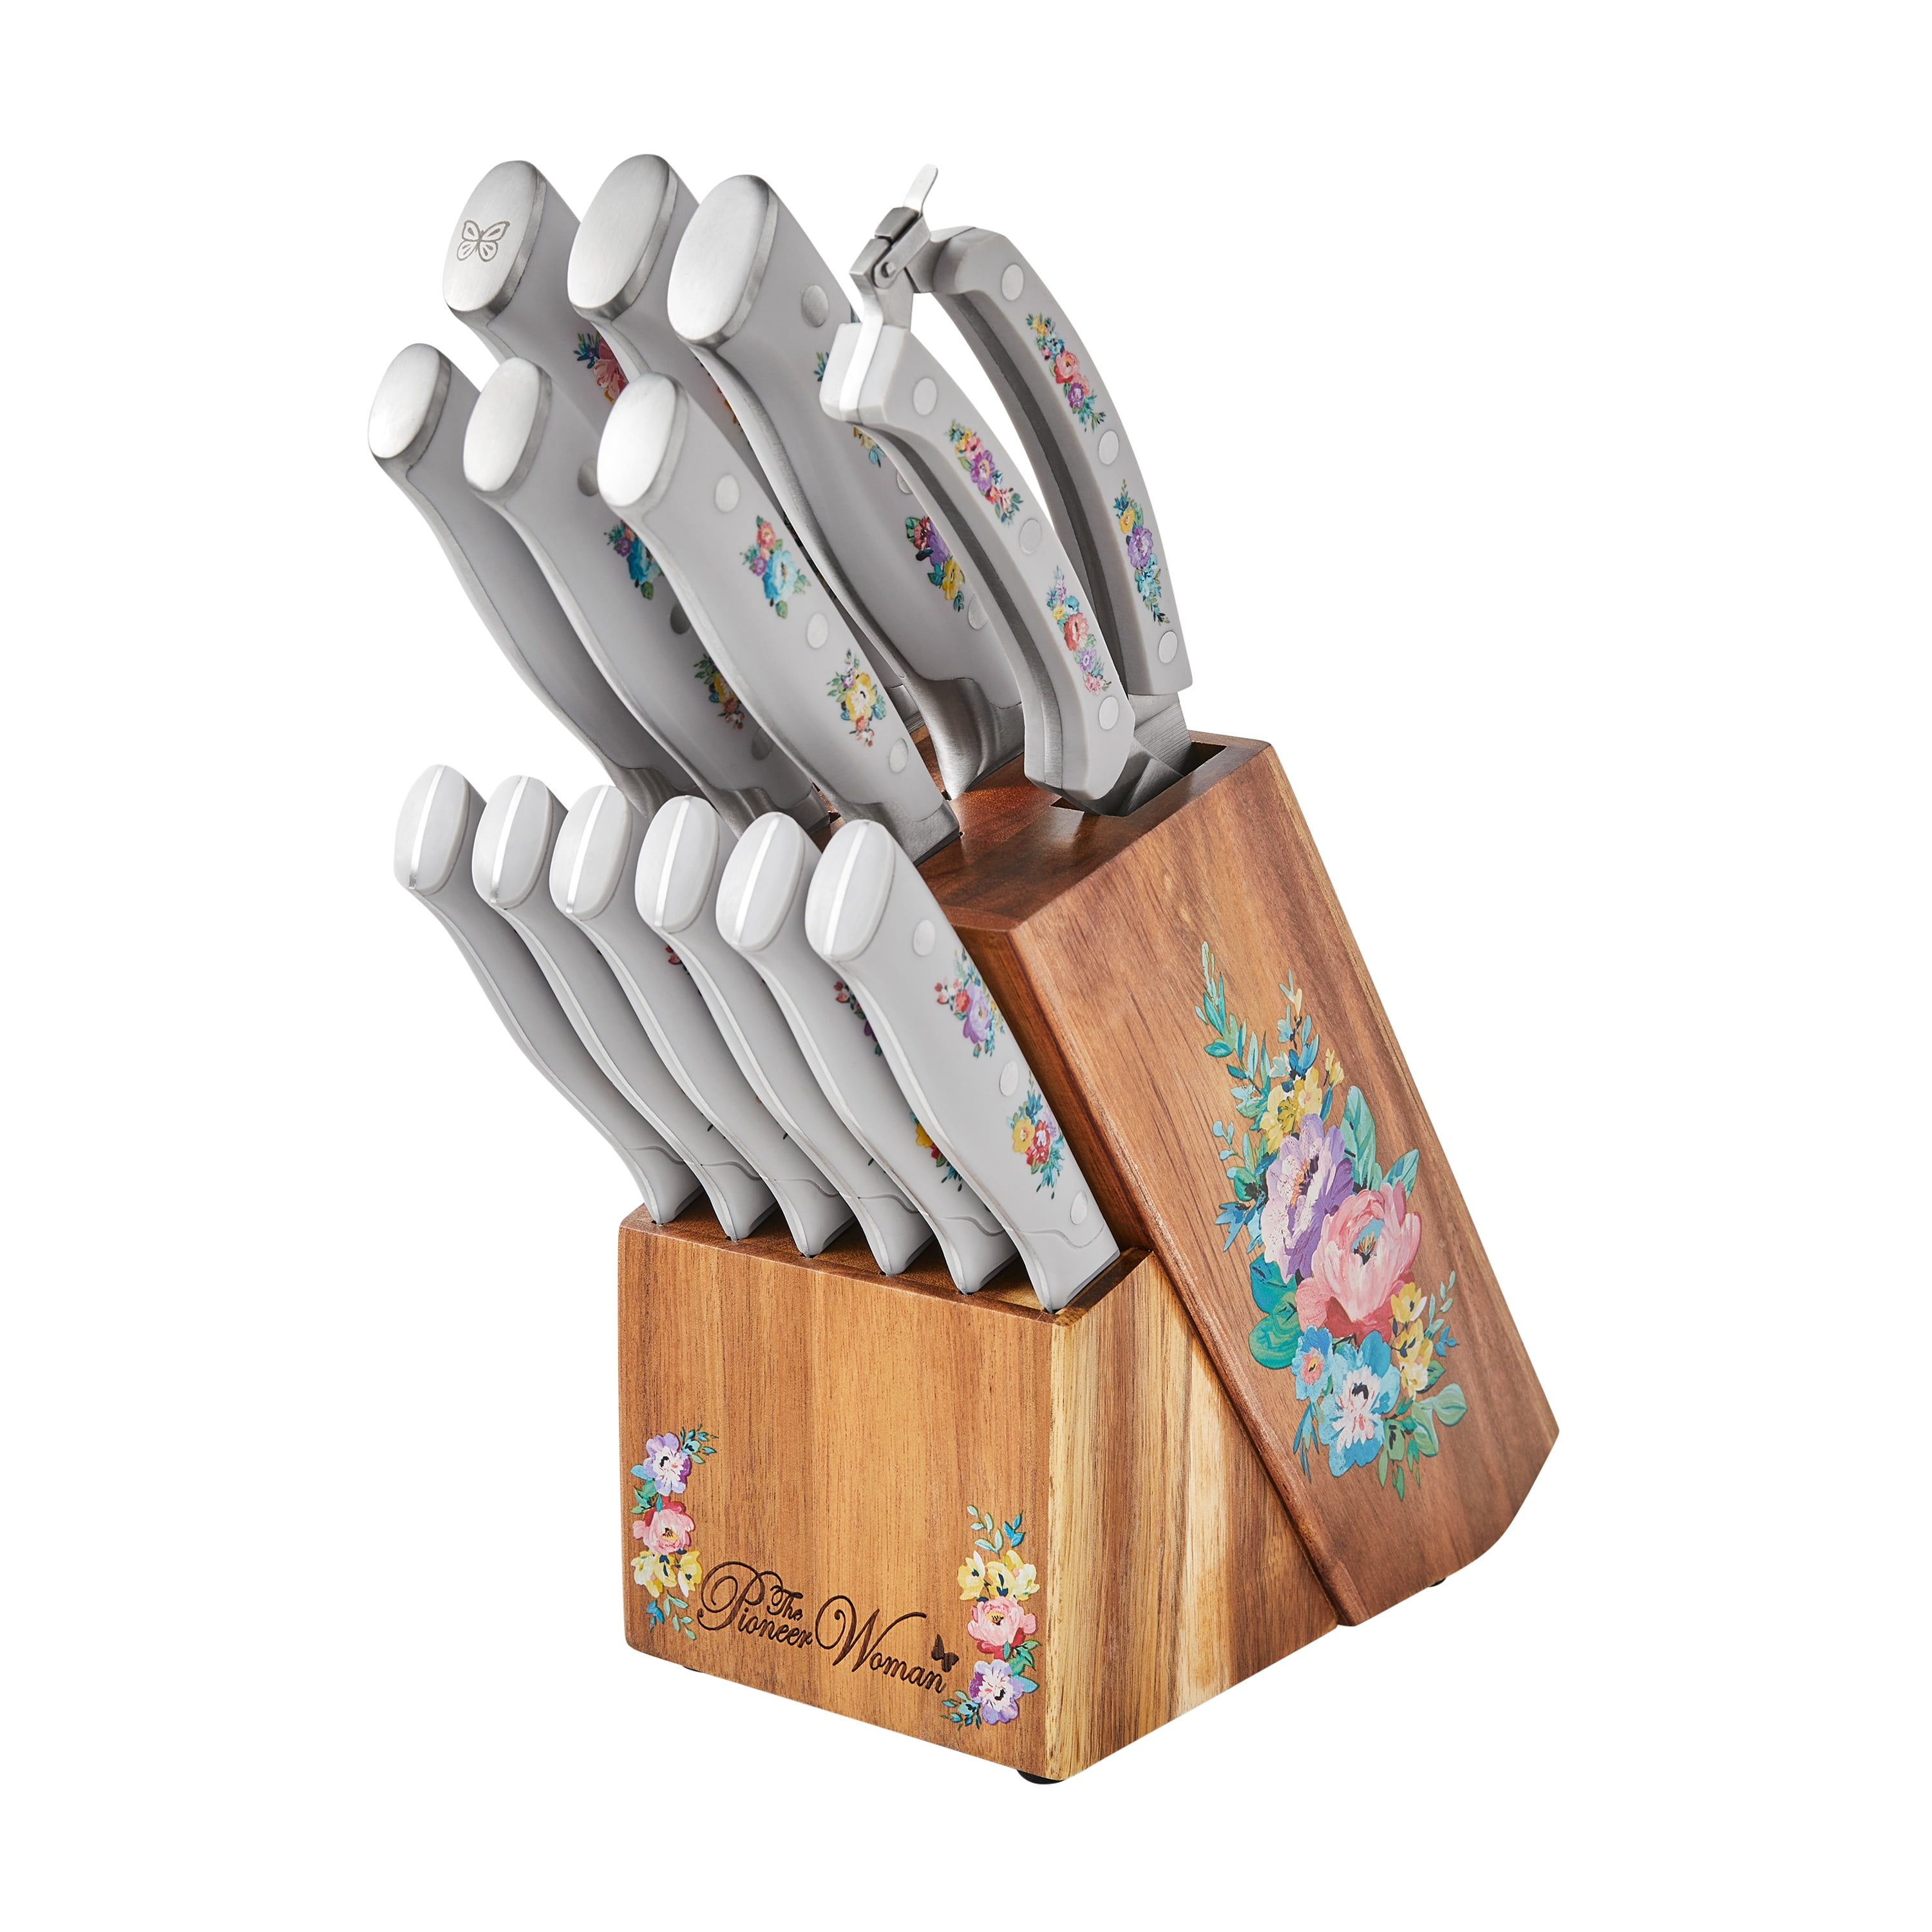 Piklohas FD Magnetic Kitchen Knife Set-14 Pieces